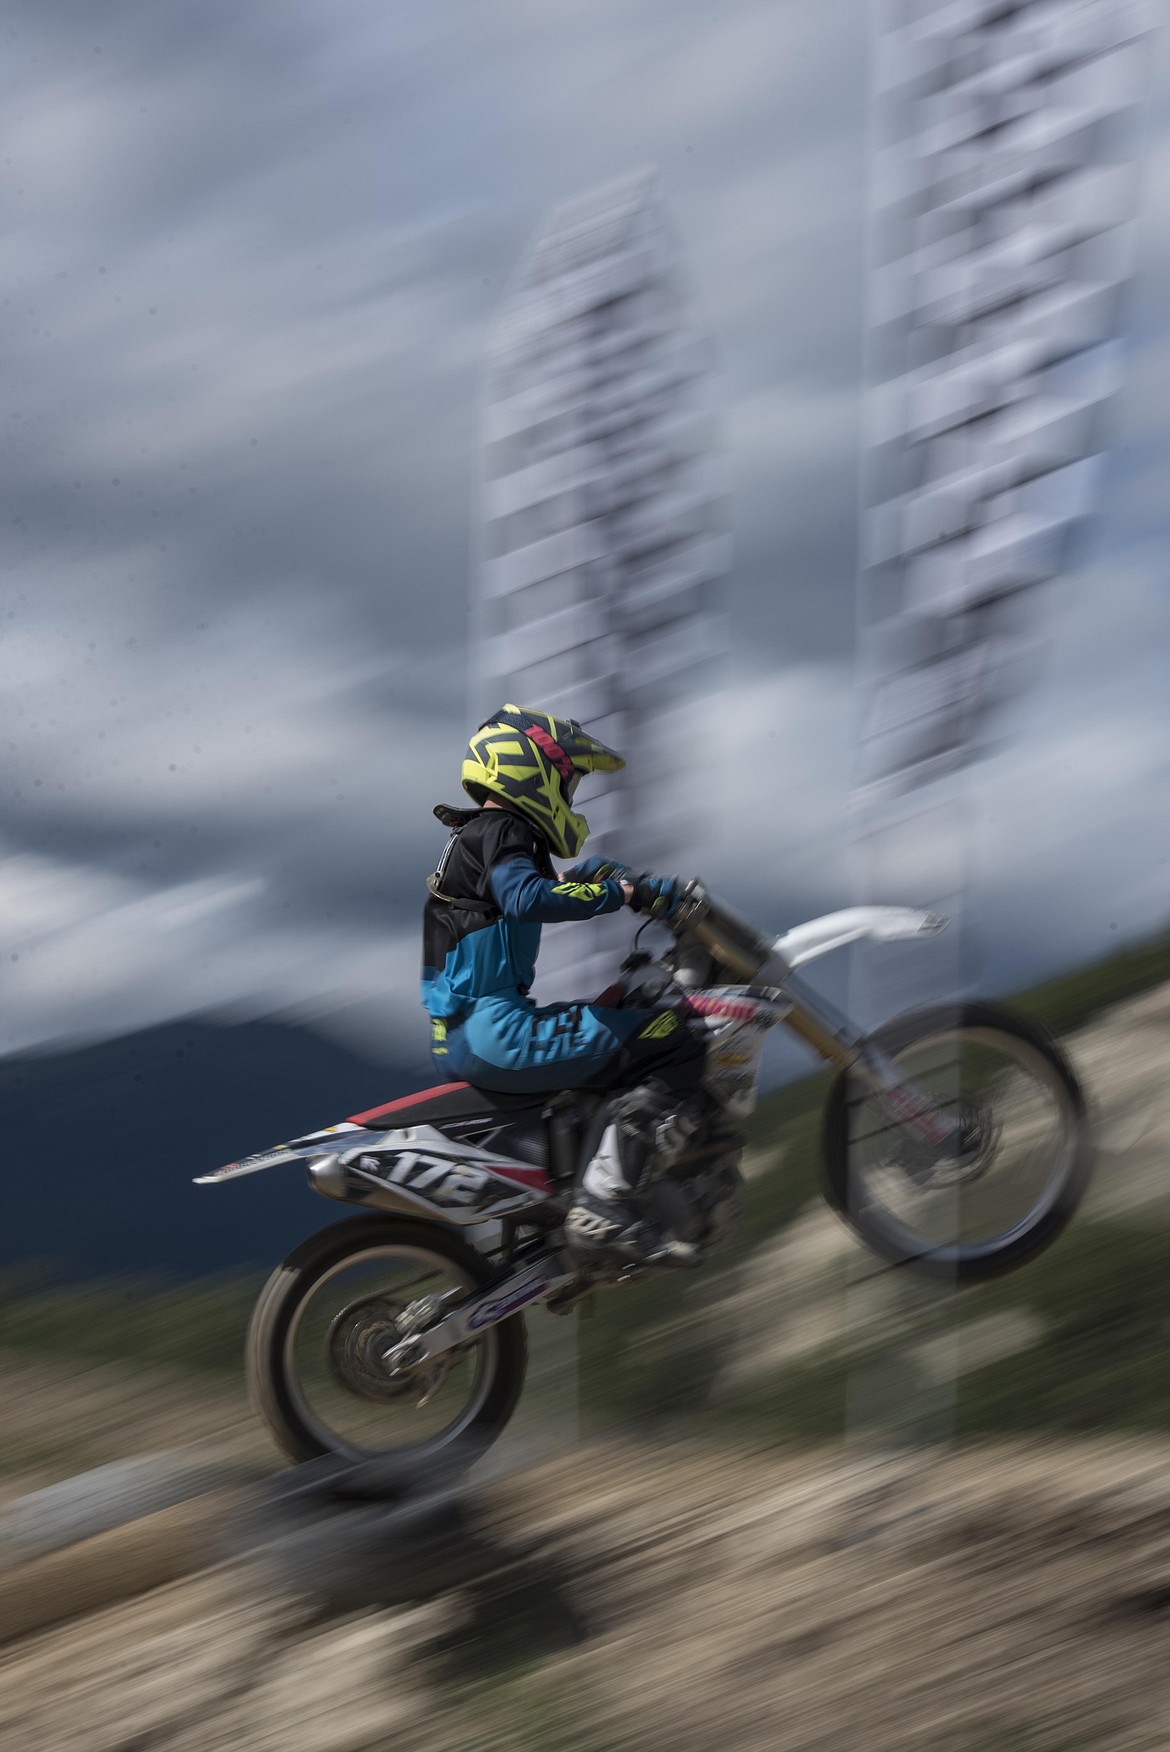 A racer finishes a lap while competing in the 250cc section of the Millpond Motocross race, Saturday in Libby. (Luke Hollister/The Western News)